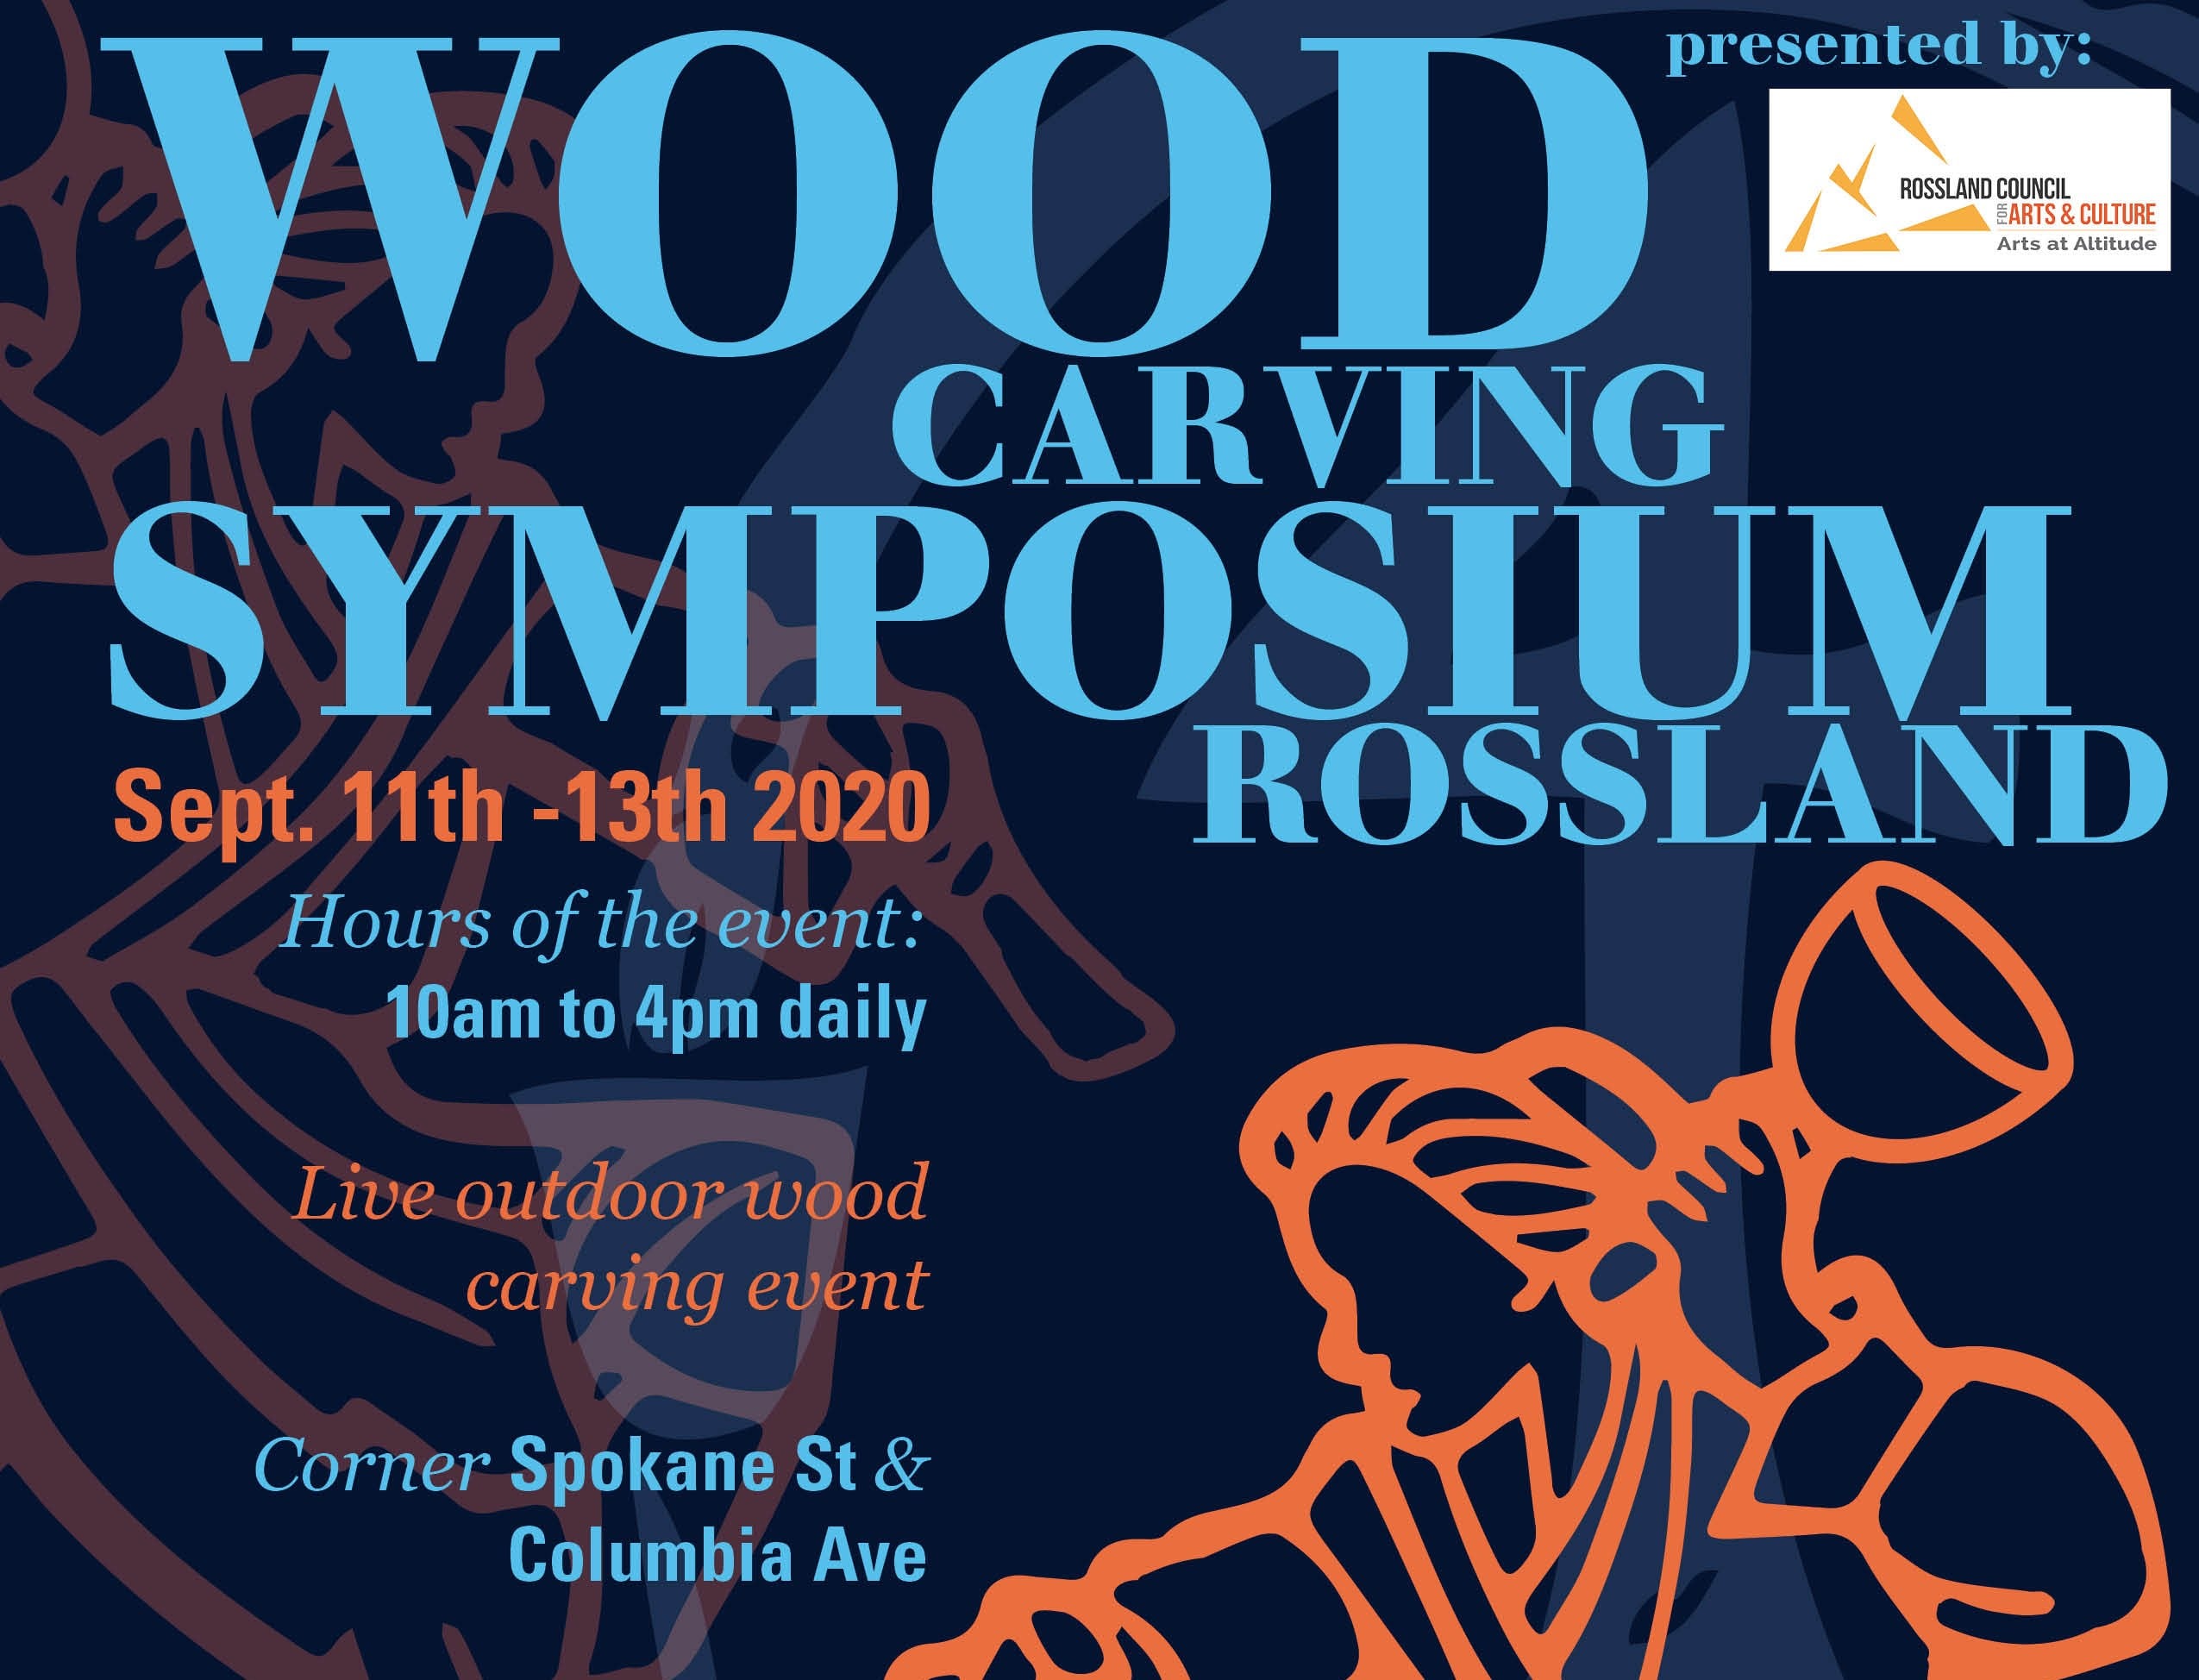 Woodcarving symposium in Rossland